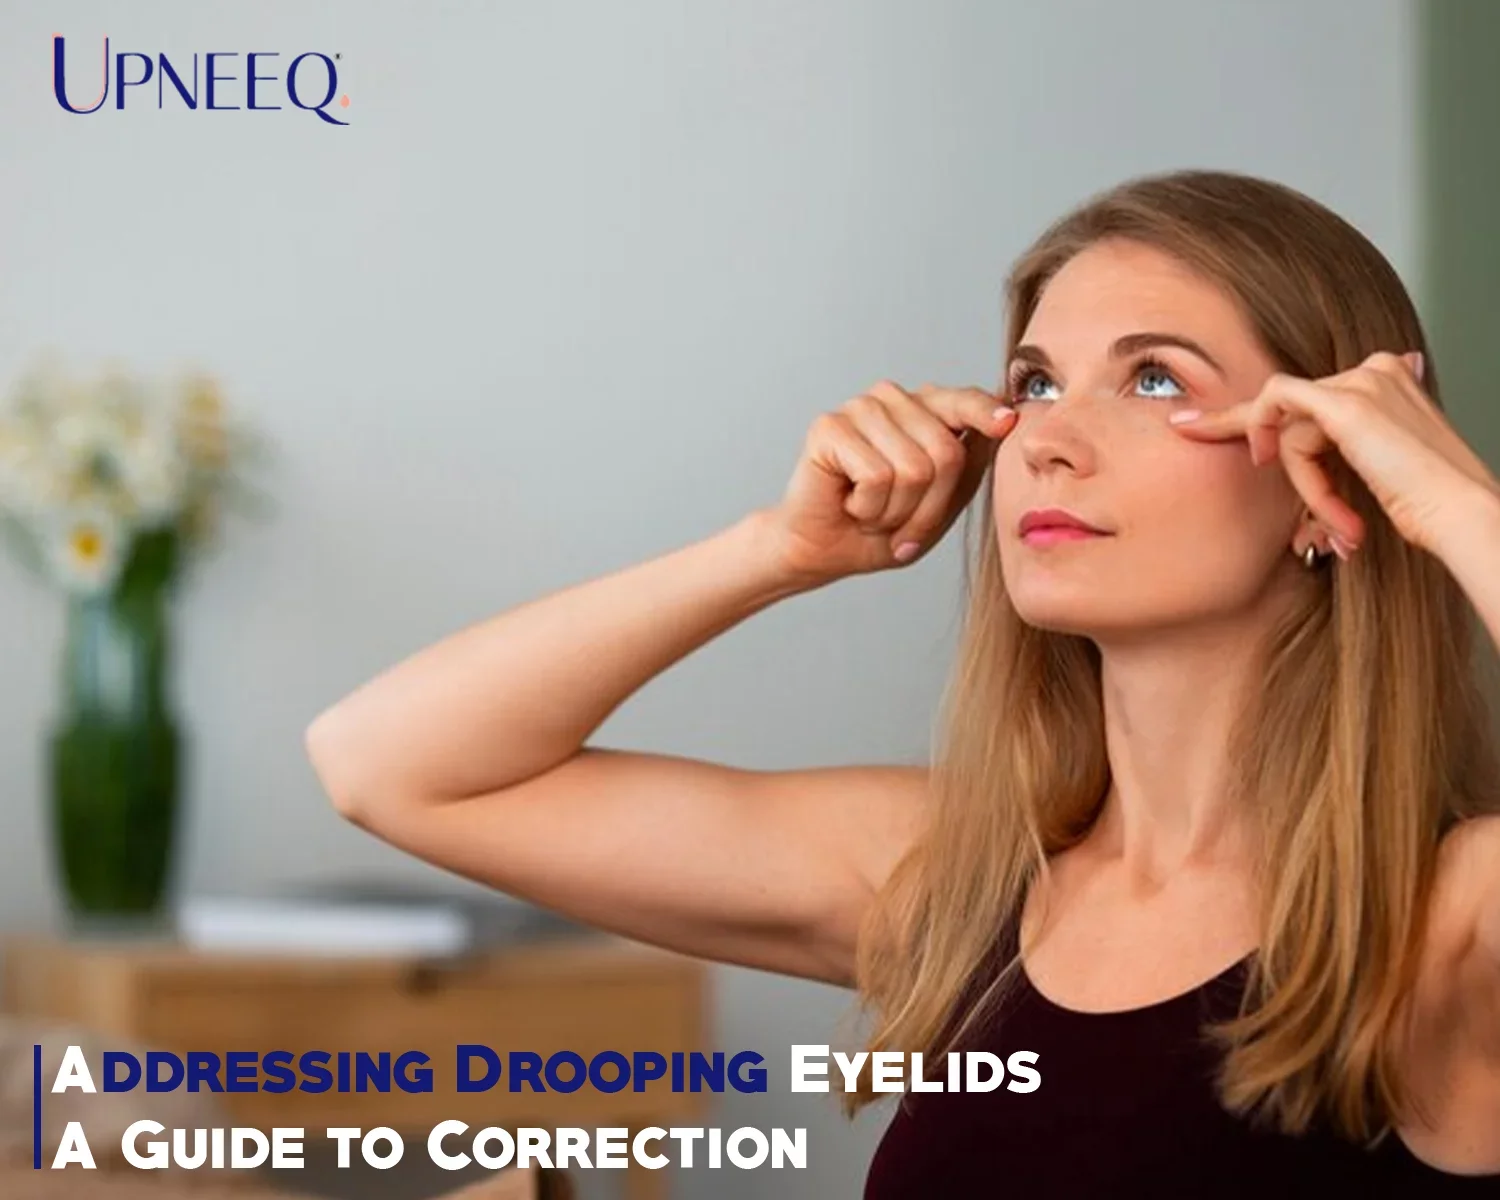 Addressing Drooping Eyelids: A Guide to Correction